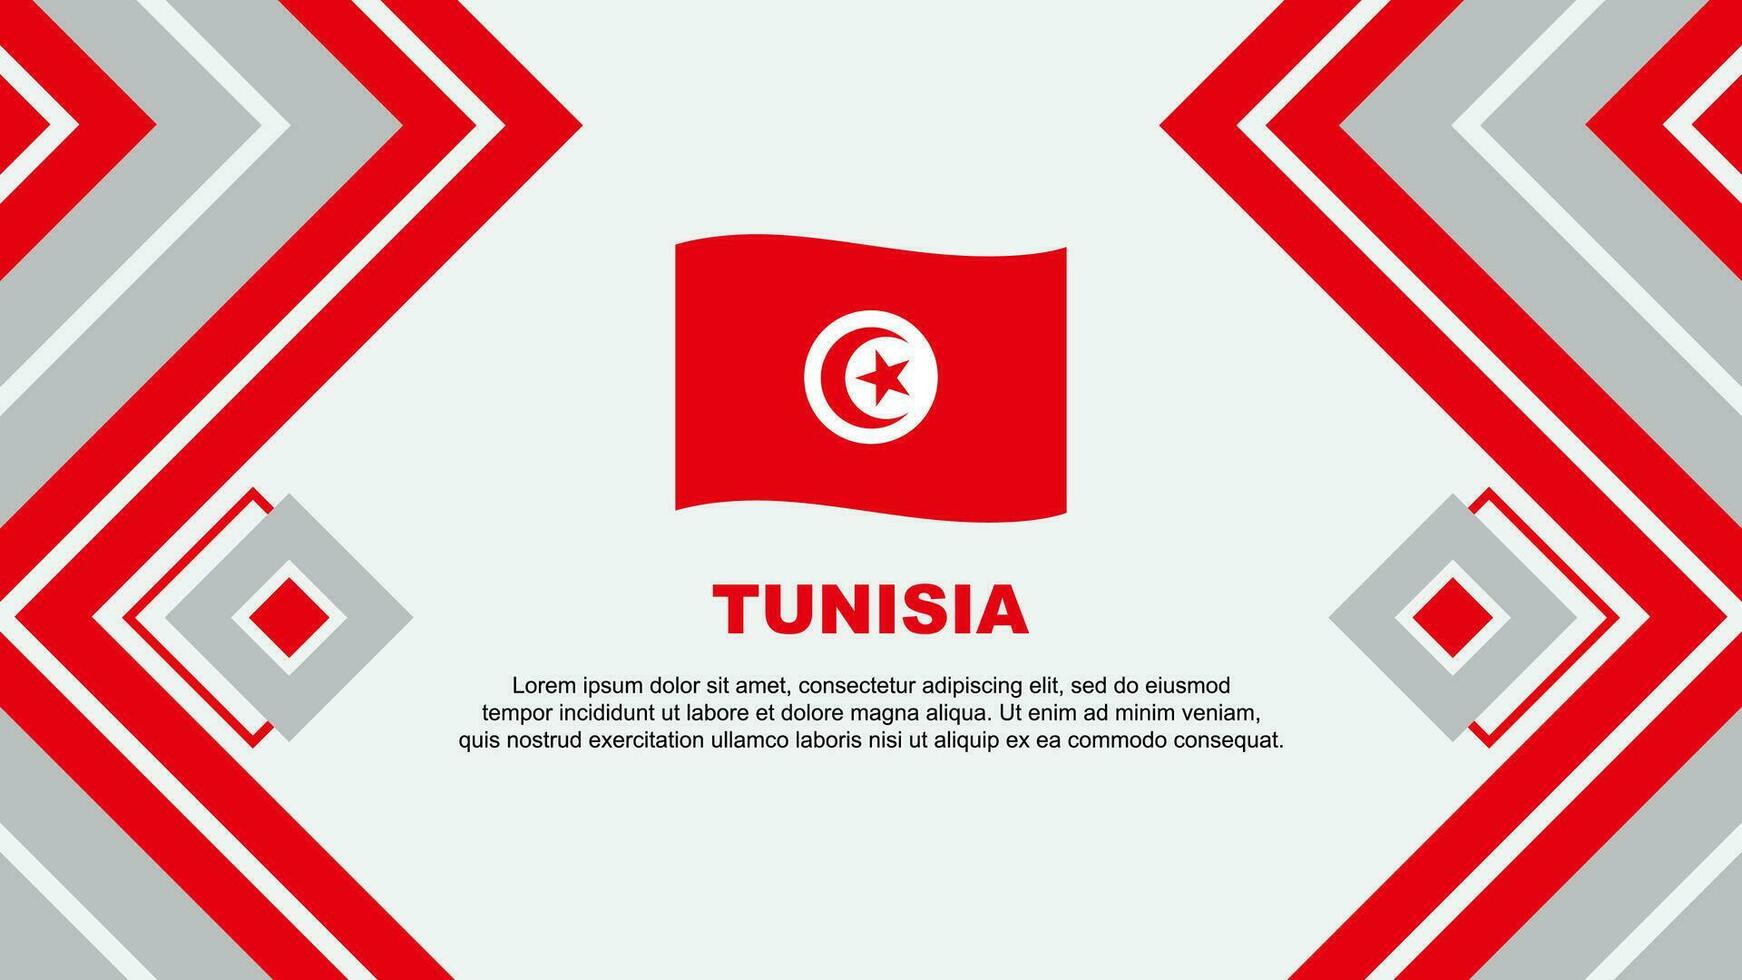 Tunisia Flag Abstract Background Design Template. Tunisia Independence Day Banner Wallpaper Vector Illustration. Tunisia Design